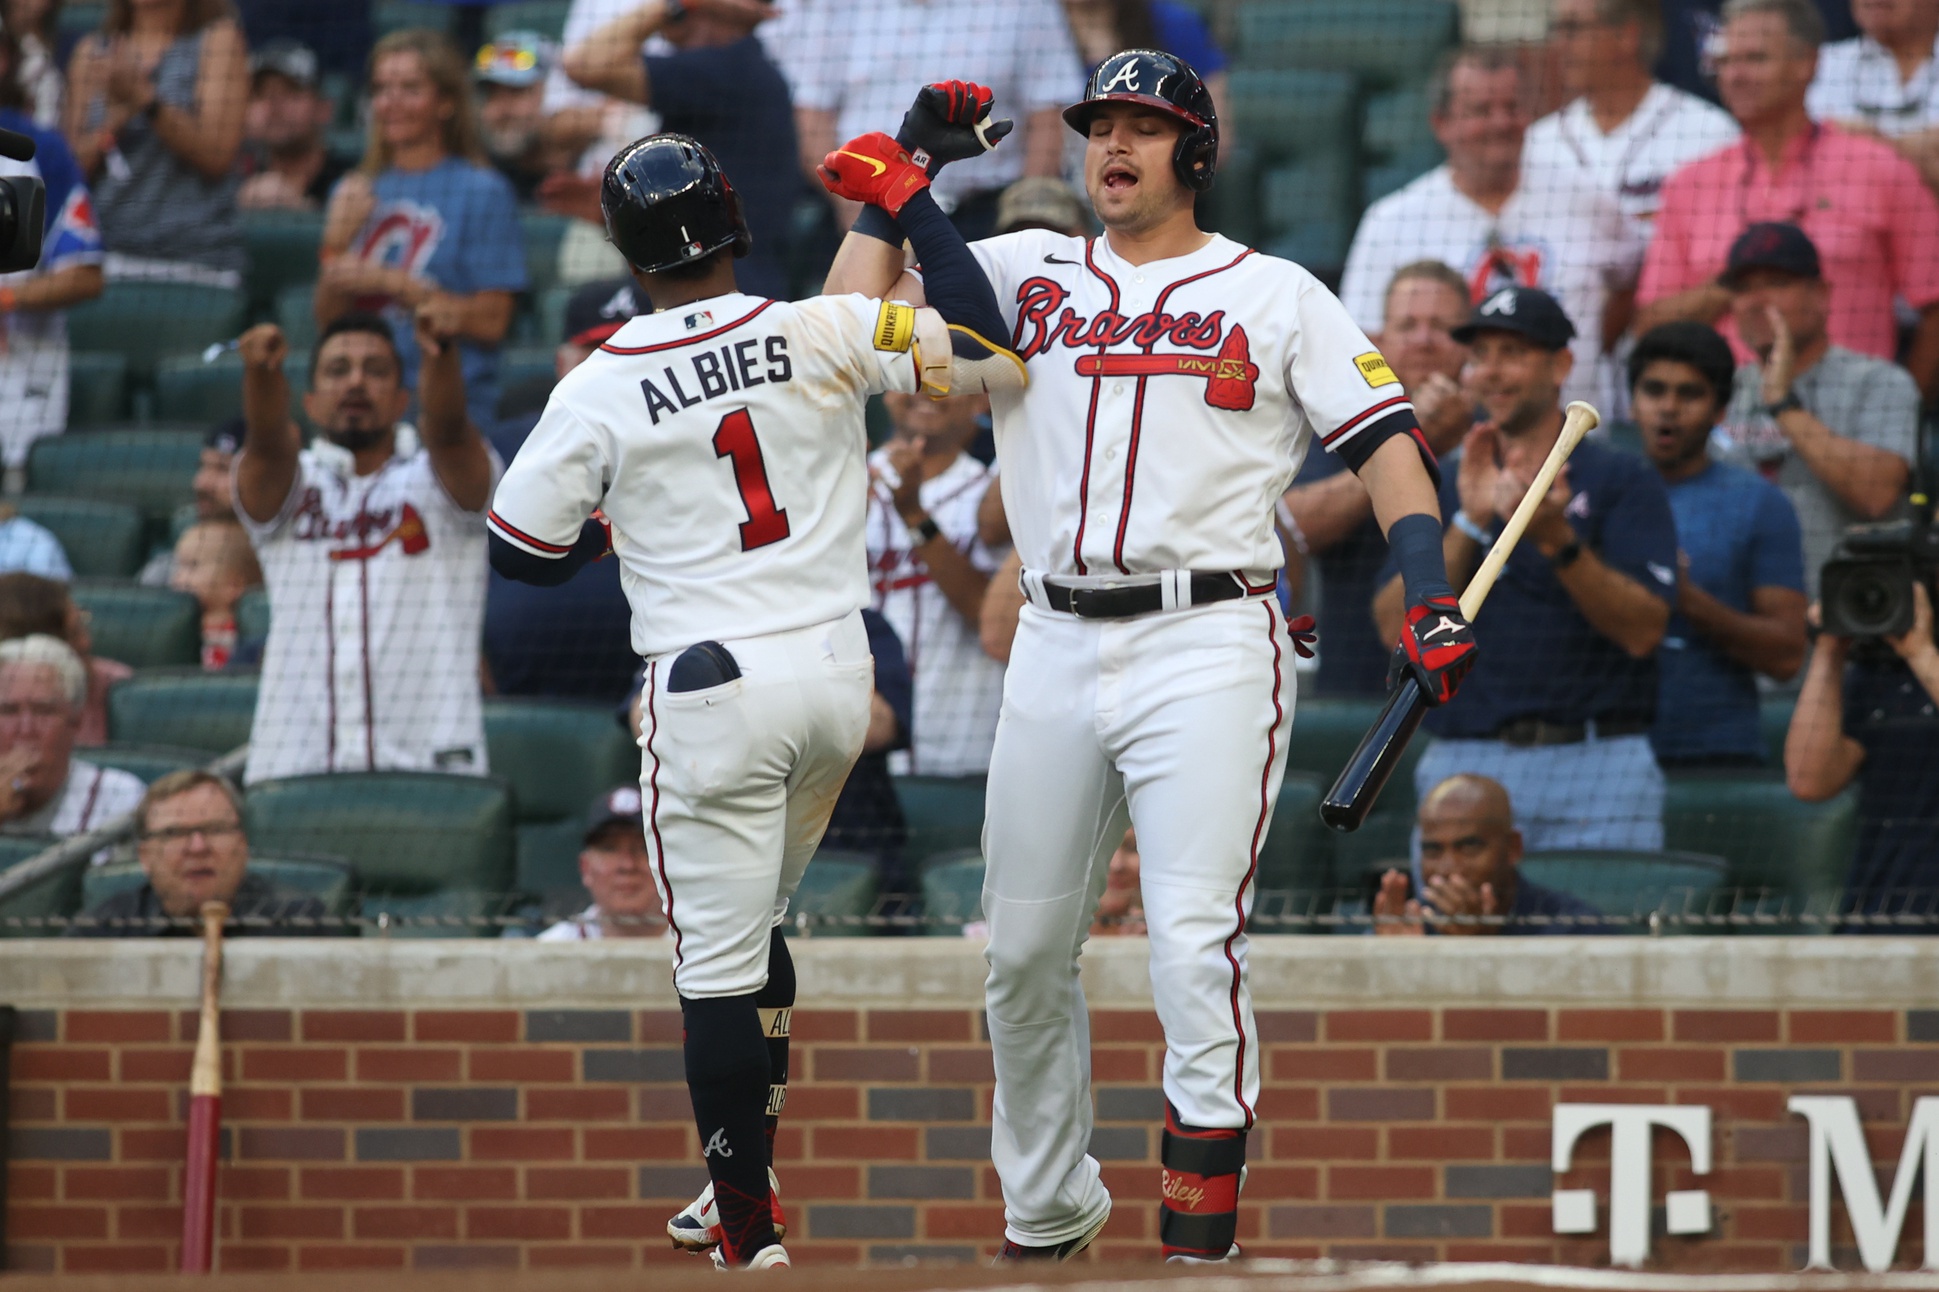 Watch You Can Now Own a Piece of the Atlanta Braves - Bloomberg